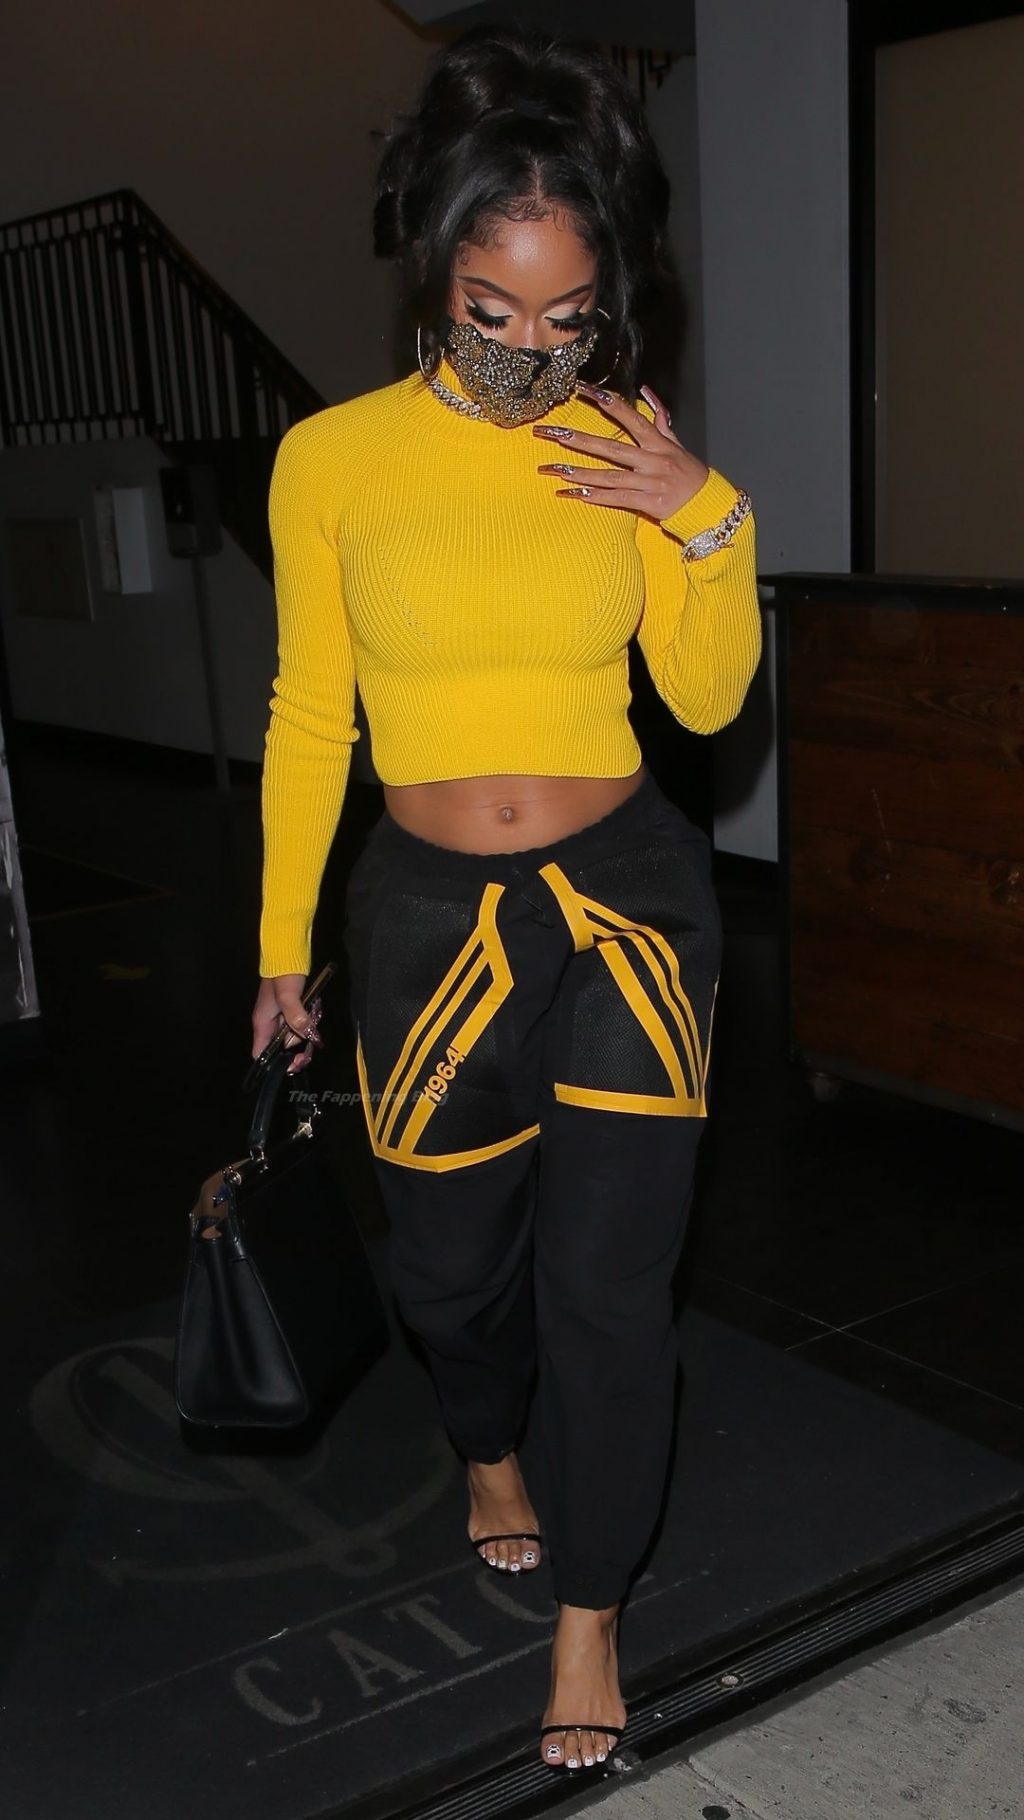 Saweetie Exits Catch LA After Dinner with a Friend (62 Photos)